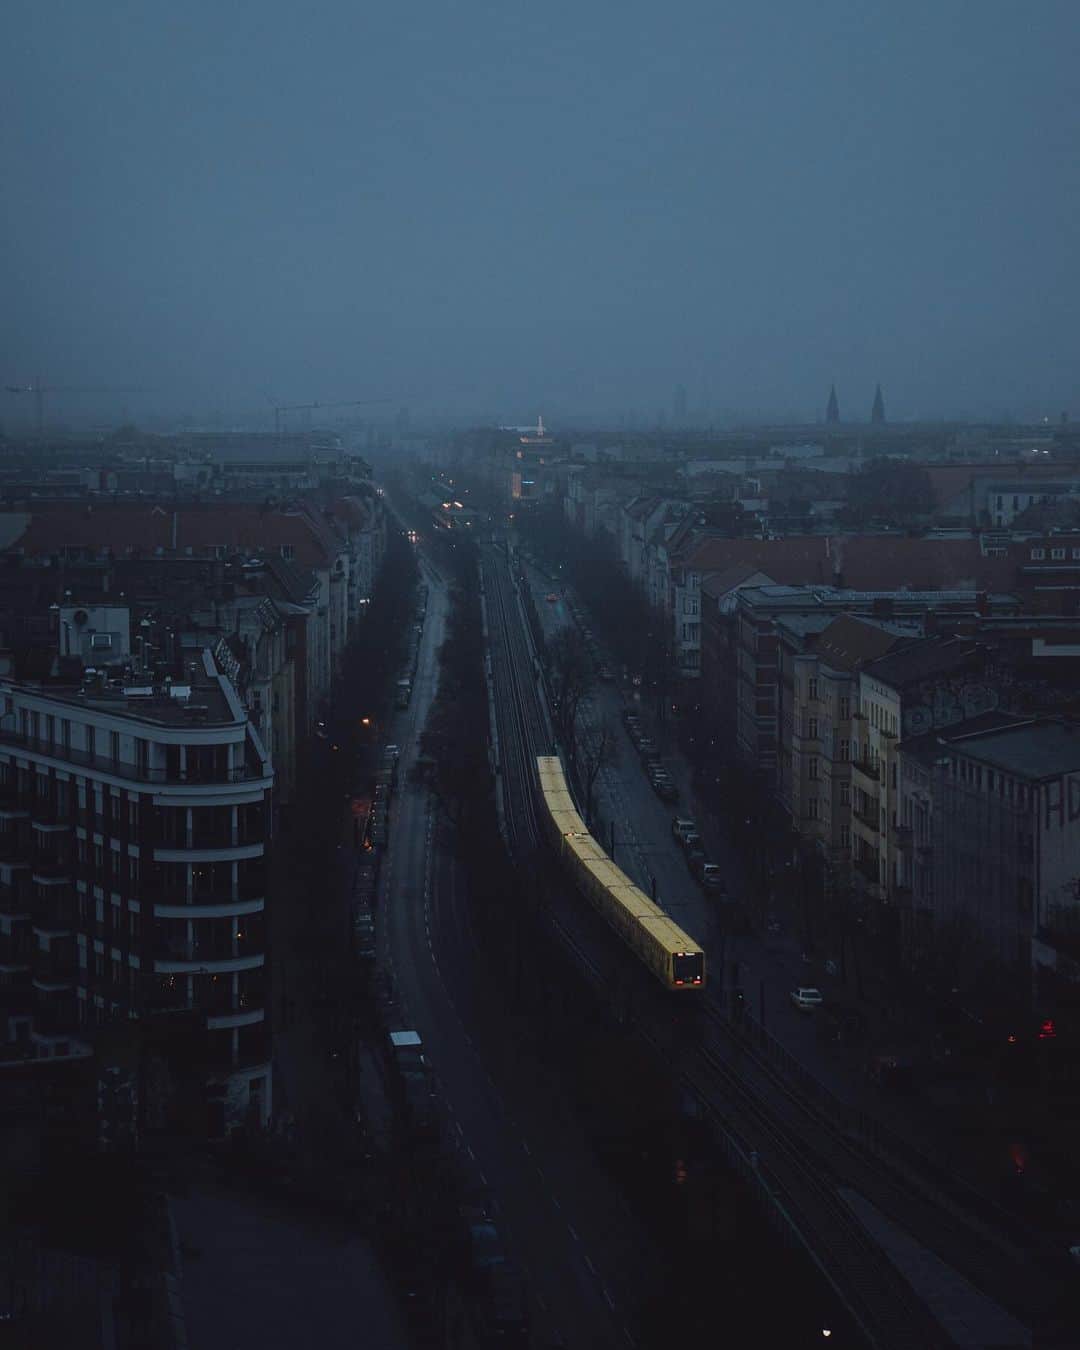 Thomas Kakarekoのインスタグラム：「Capturing Berlin’s U-Bahn from the rooftops has been more than just a photographic pursuit for me - it’s a visual diary of years spent exploring, feeling, and connecting with this city. Each frame holds a moment, a memory. And while motifs may evolve, some things remain timeless. #berlin」